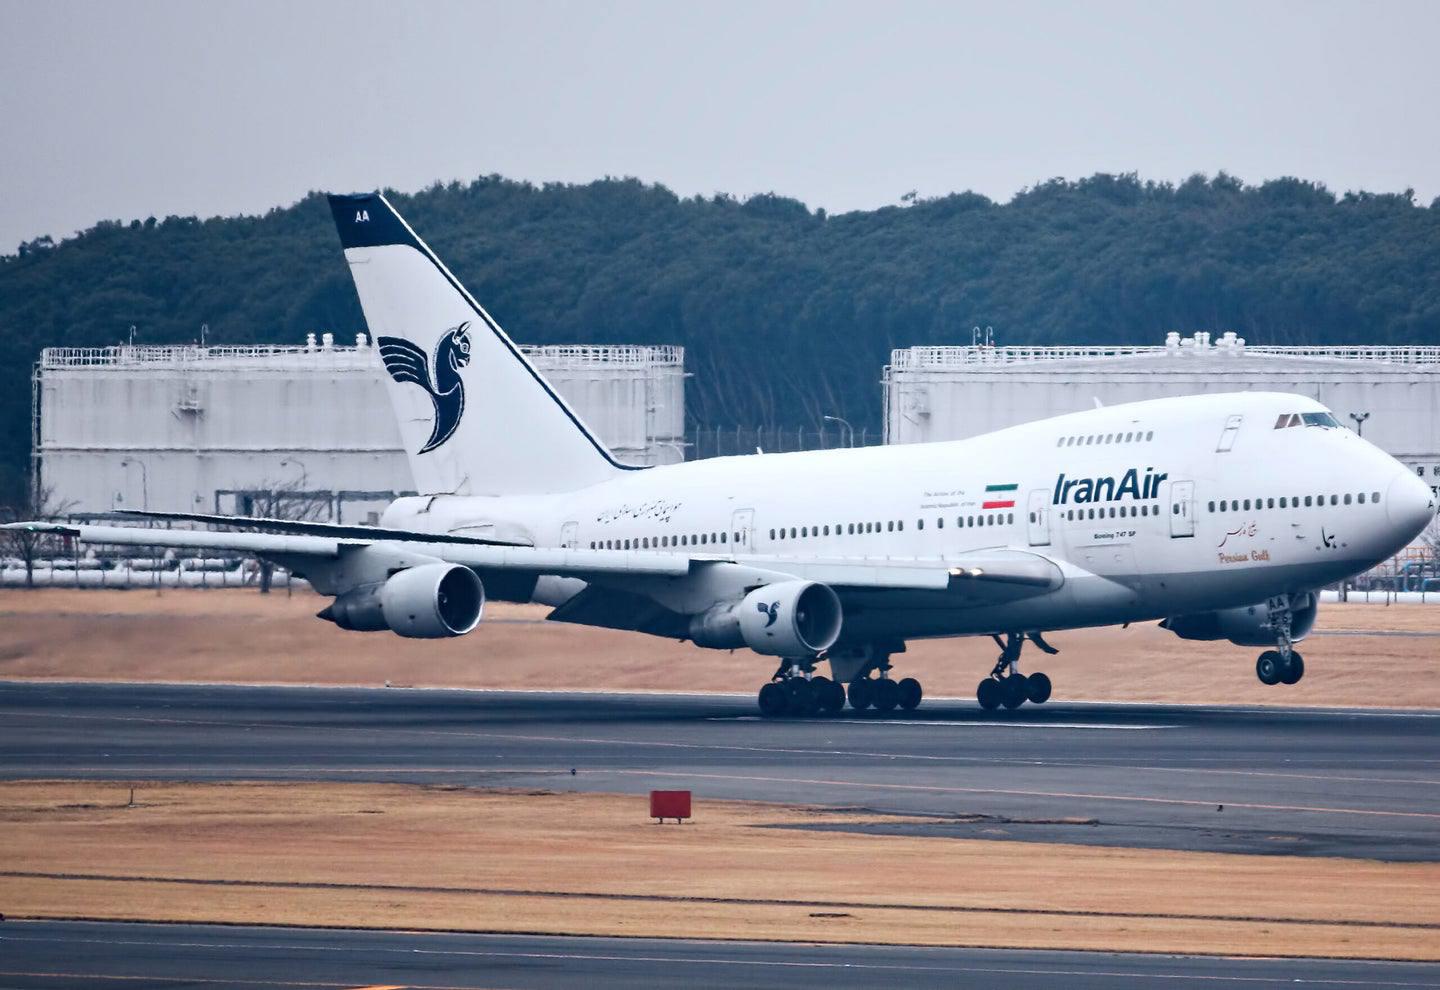 ifmat - Iran Air is selling off part of its fleet of vintage western Airliners